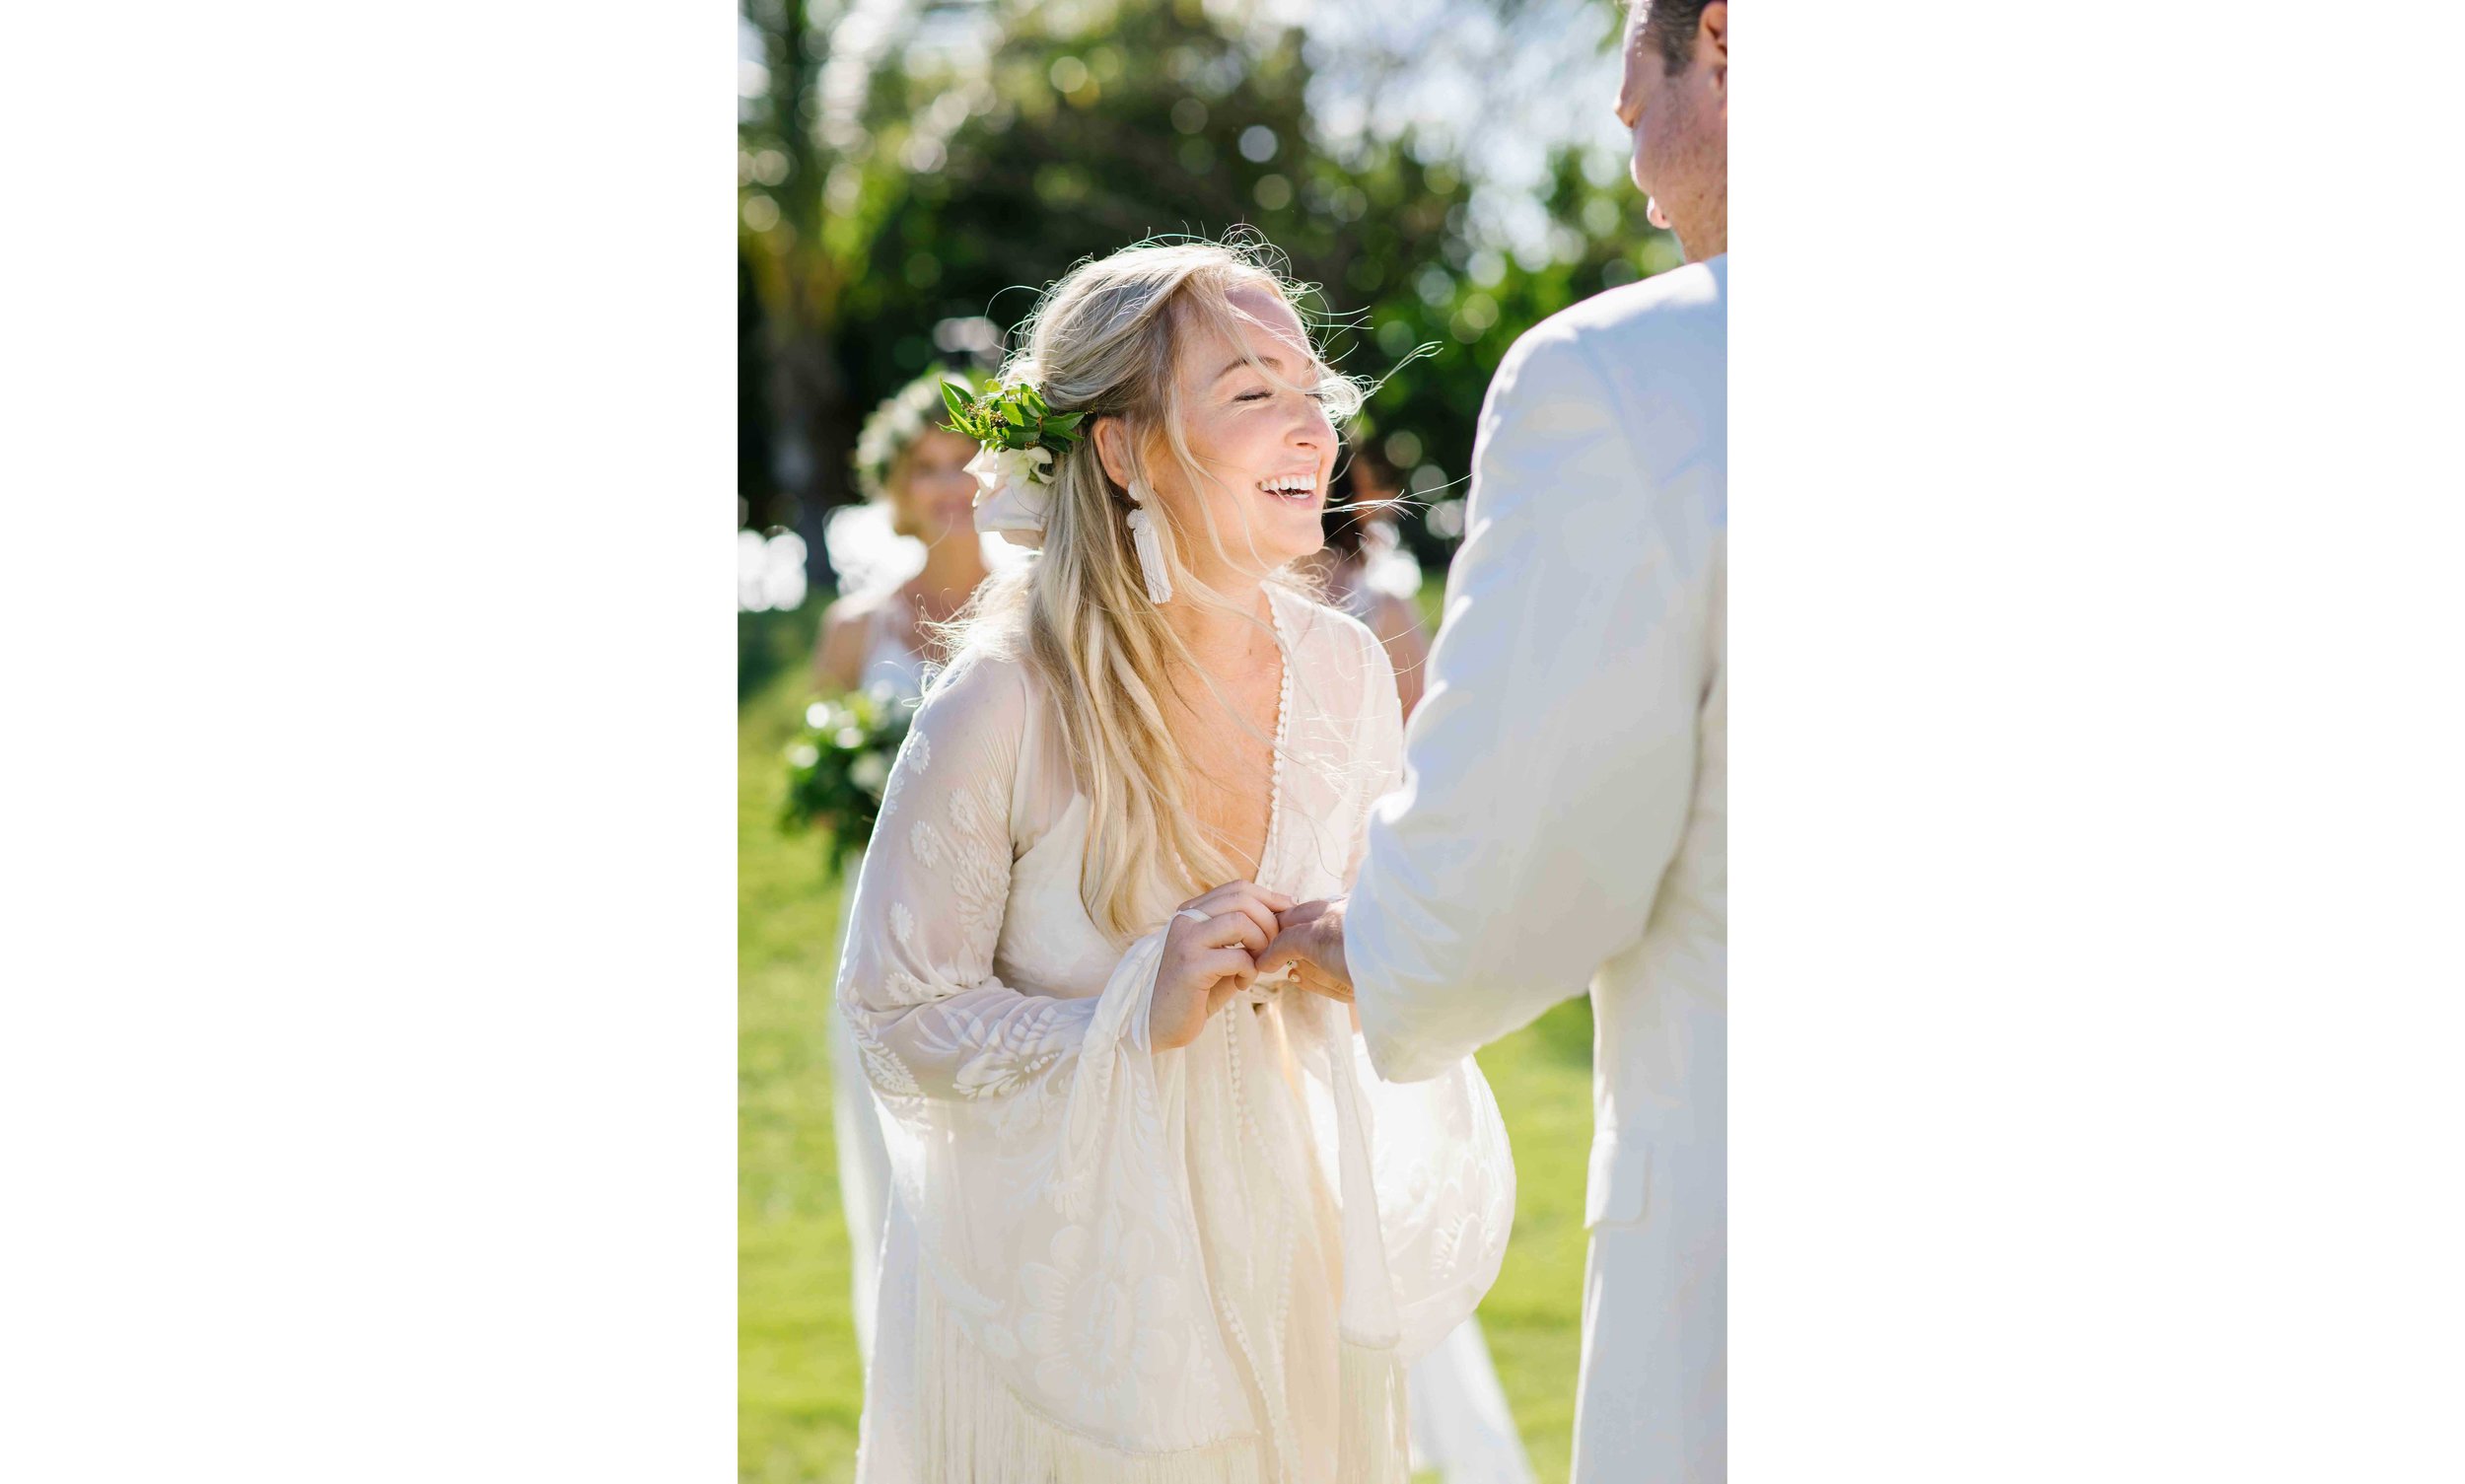 Candid Wedding Photography of a Bride Laughing